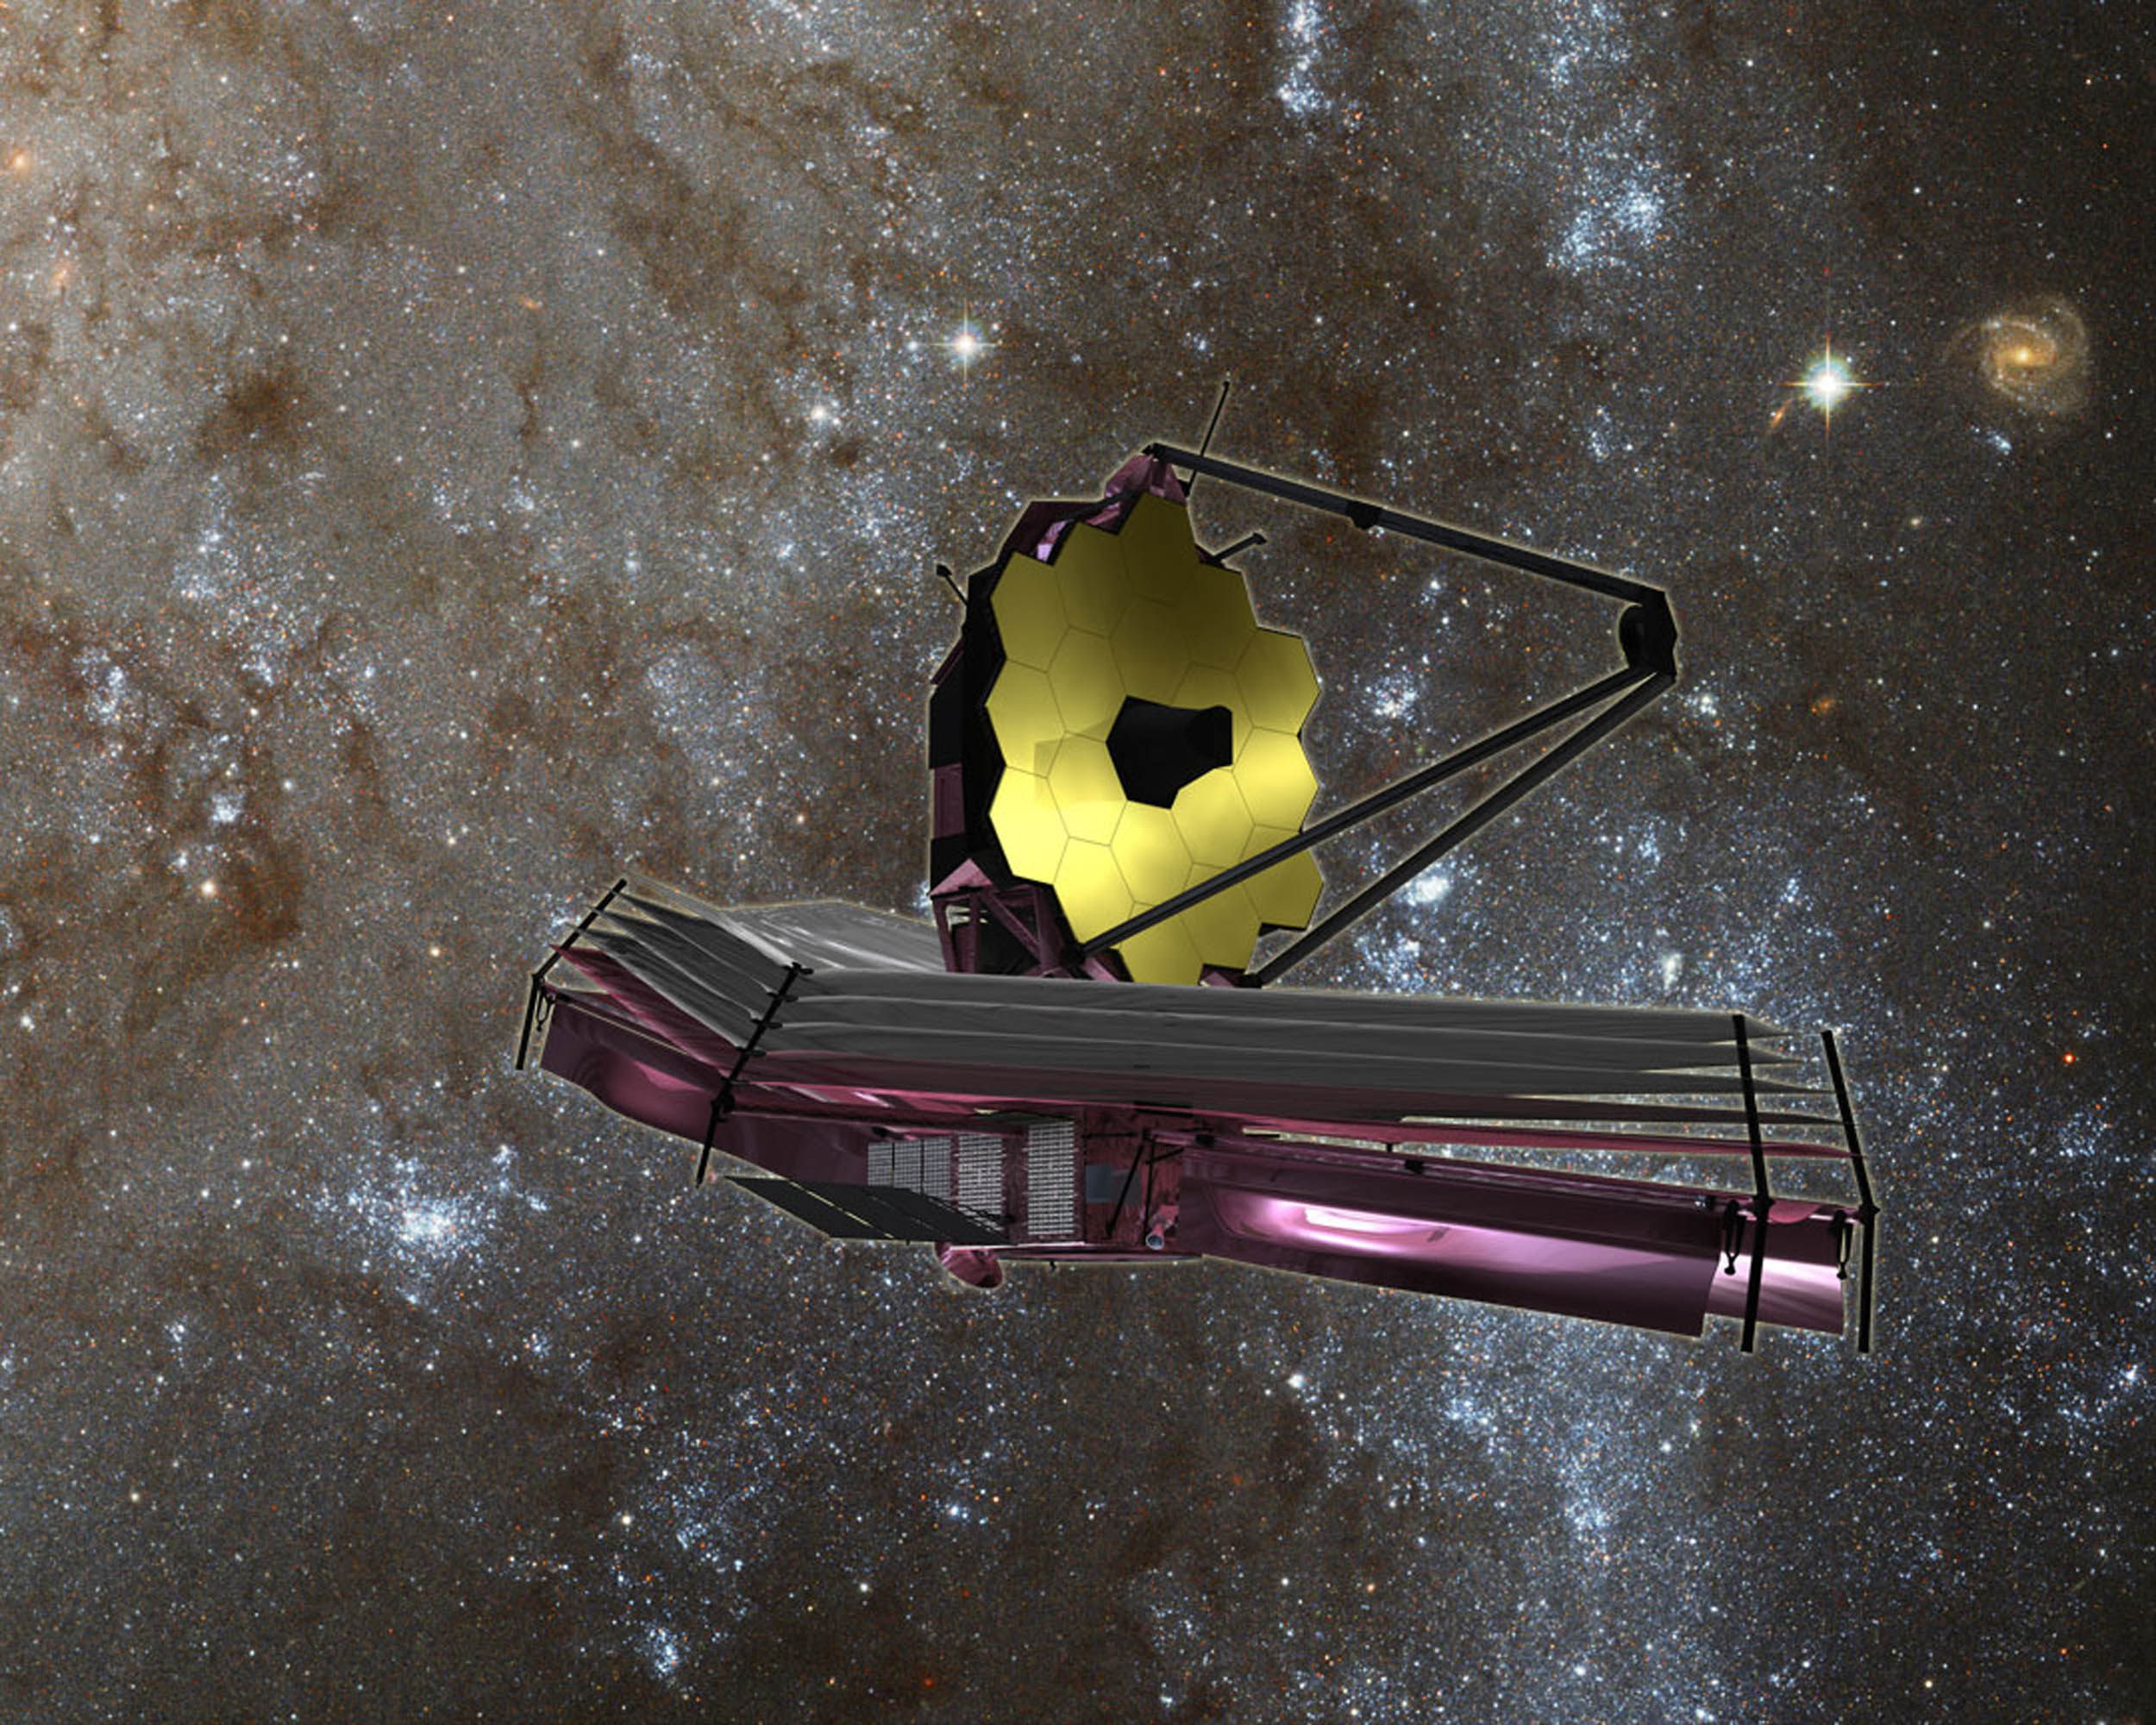 Nasa’s James Webb Space Telescope, seen here in an artist’s rendition, reached its orbital destination on Monday. Image: Nasa via AFP